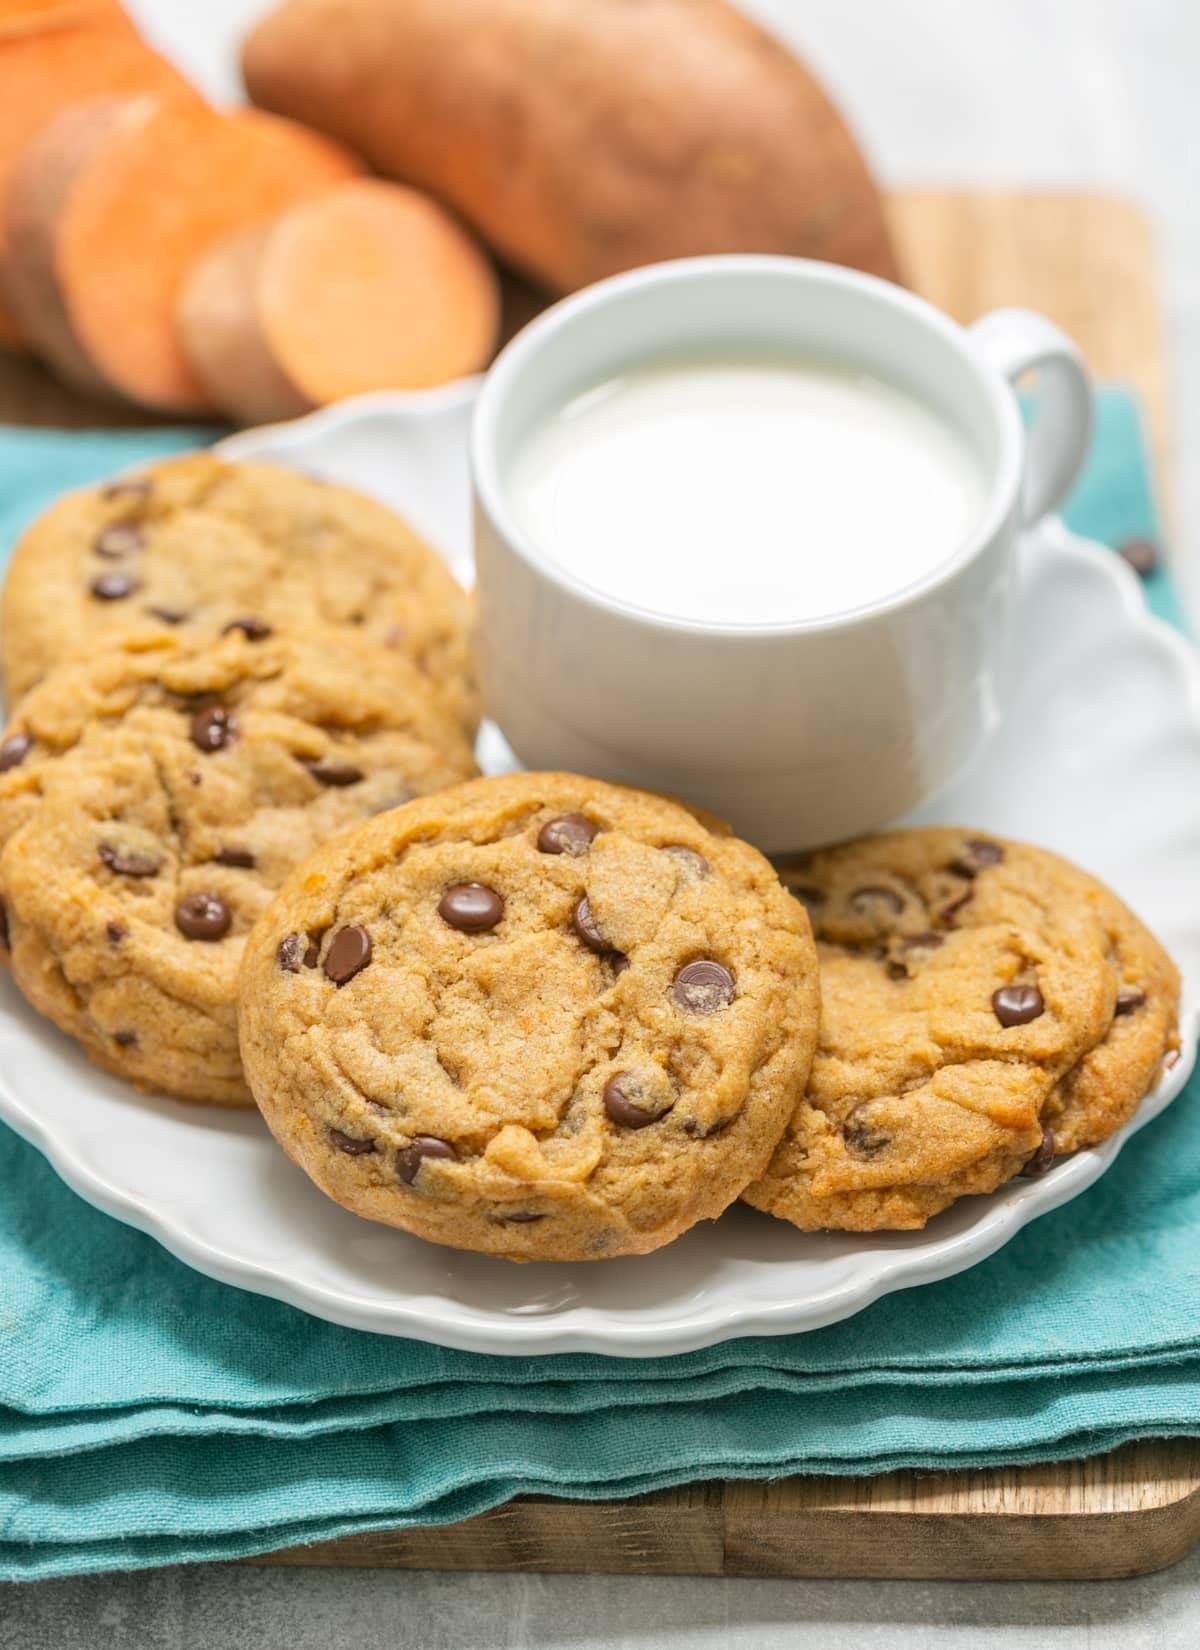 sweet potato cookies with chocolate chips.